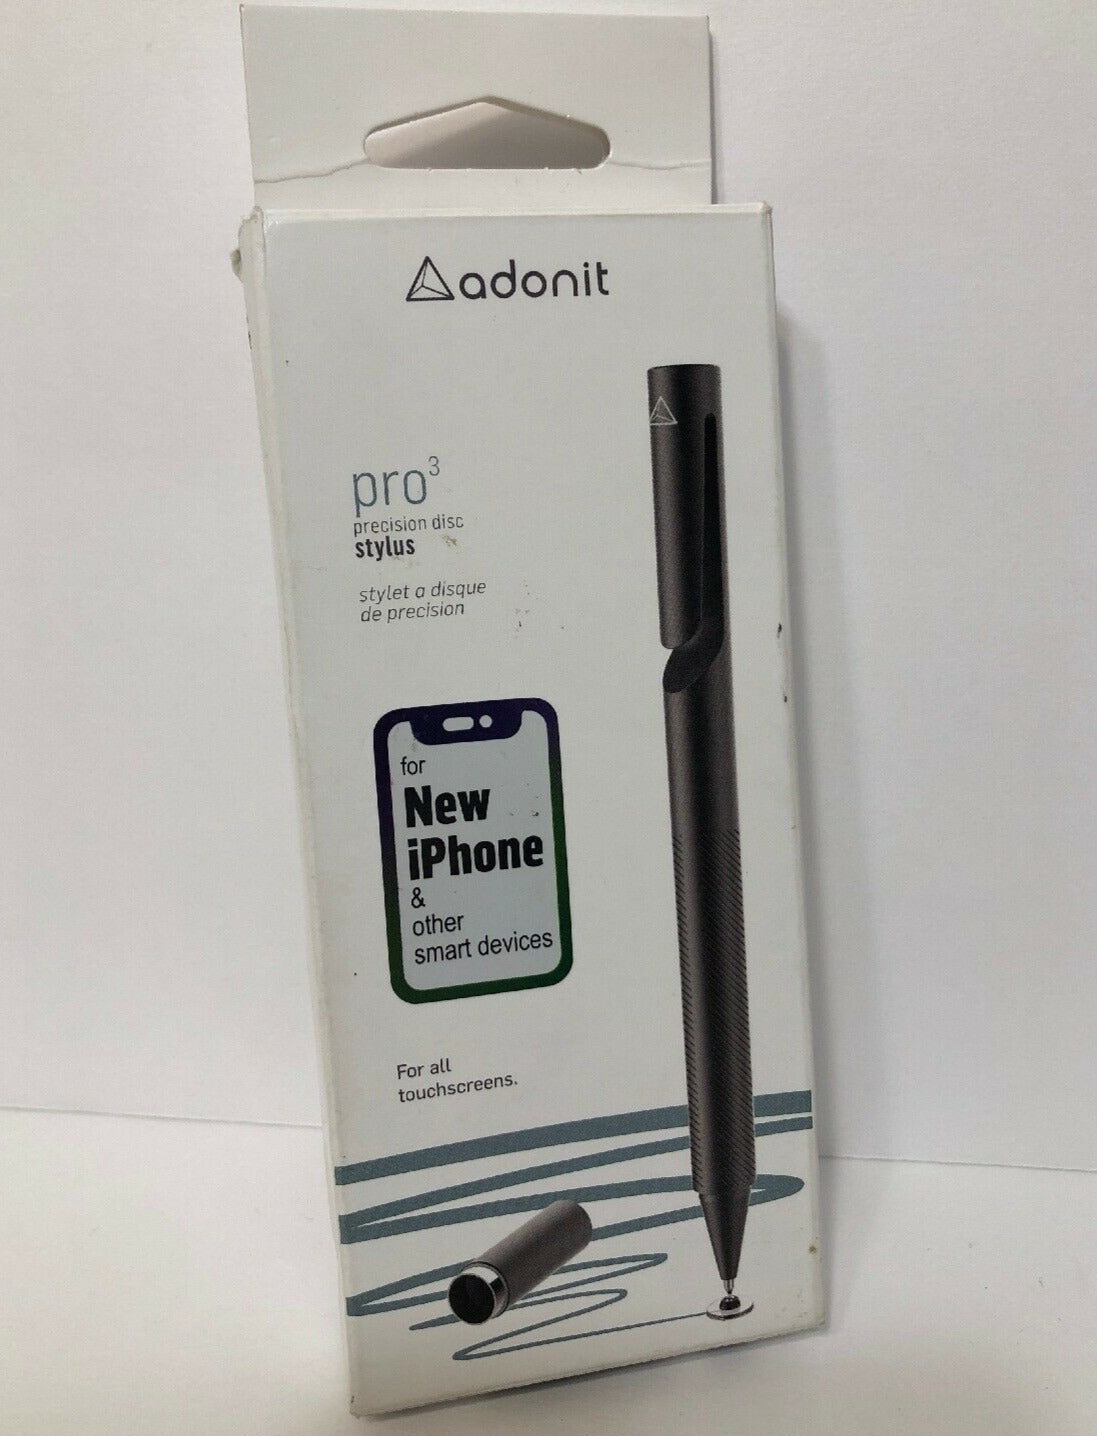 Adonit Pro 3 Precision Disc Stylus for All Touchscreens (Black)